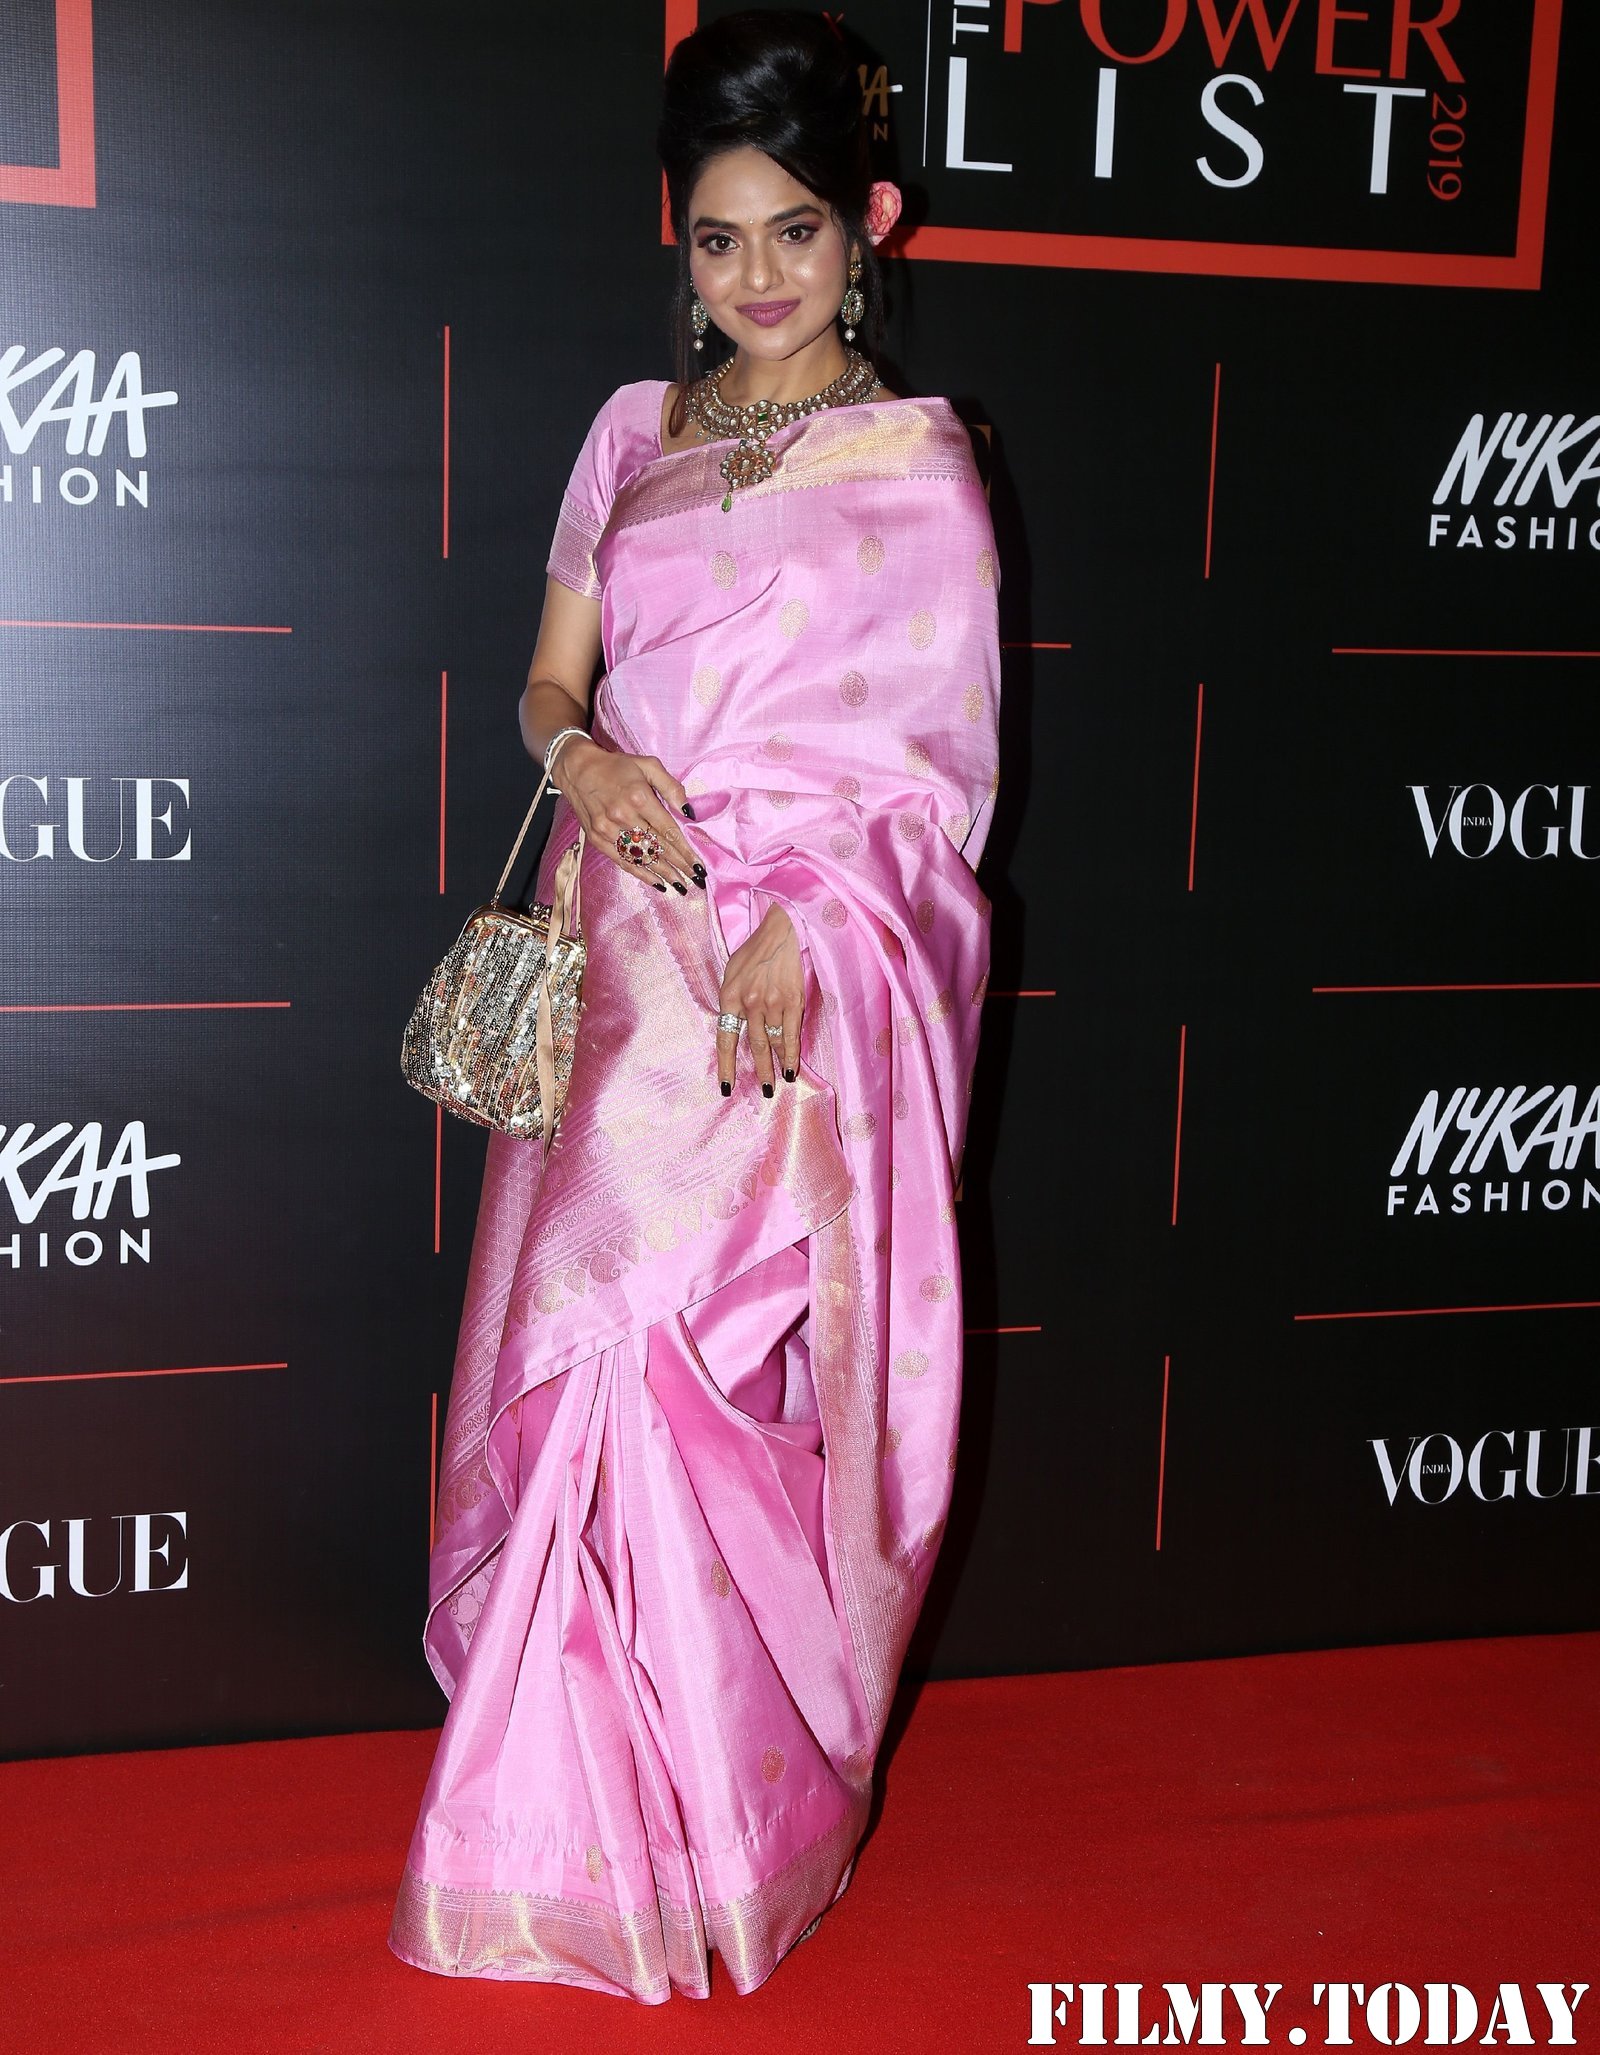 Madhoo Shah - Photos: Celebs At Vogue The Power List 2019 At St Regis Hotel | Picture 1706272